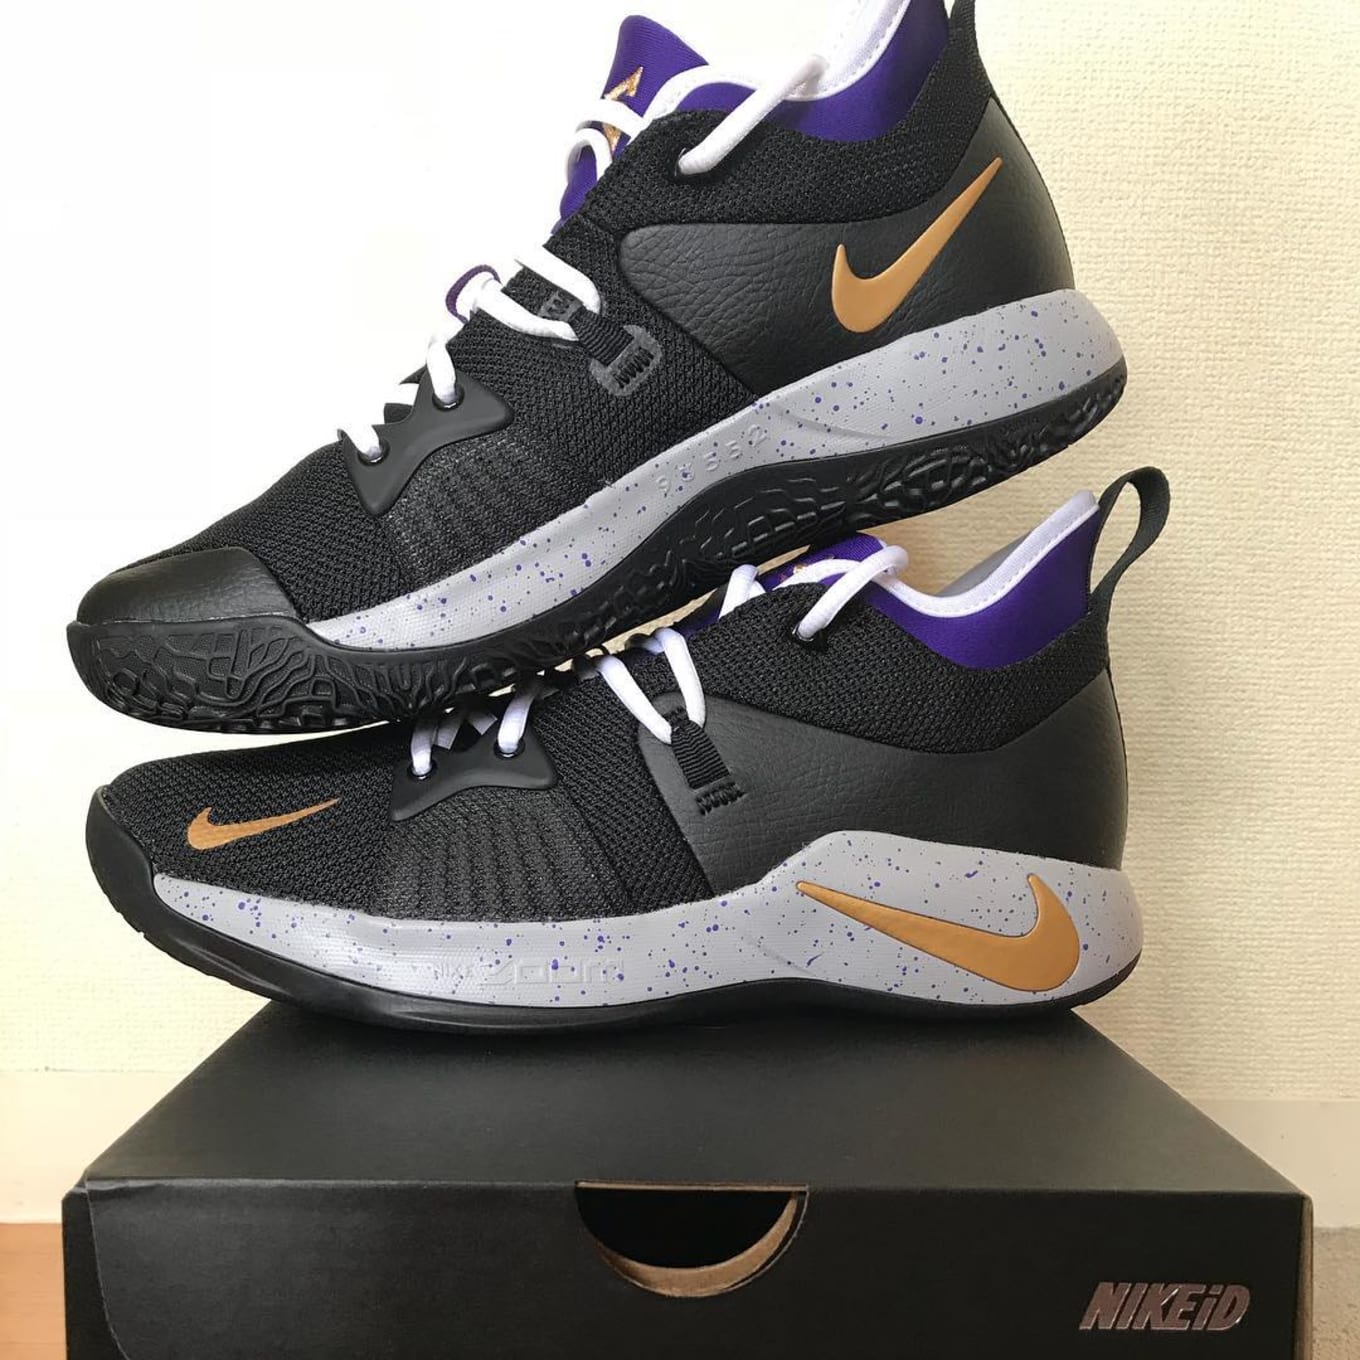 Nike By You NIKEiD PG 2 Designs | Sole 